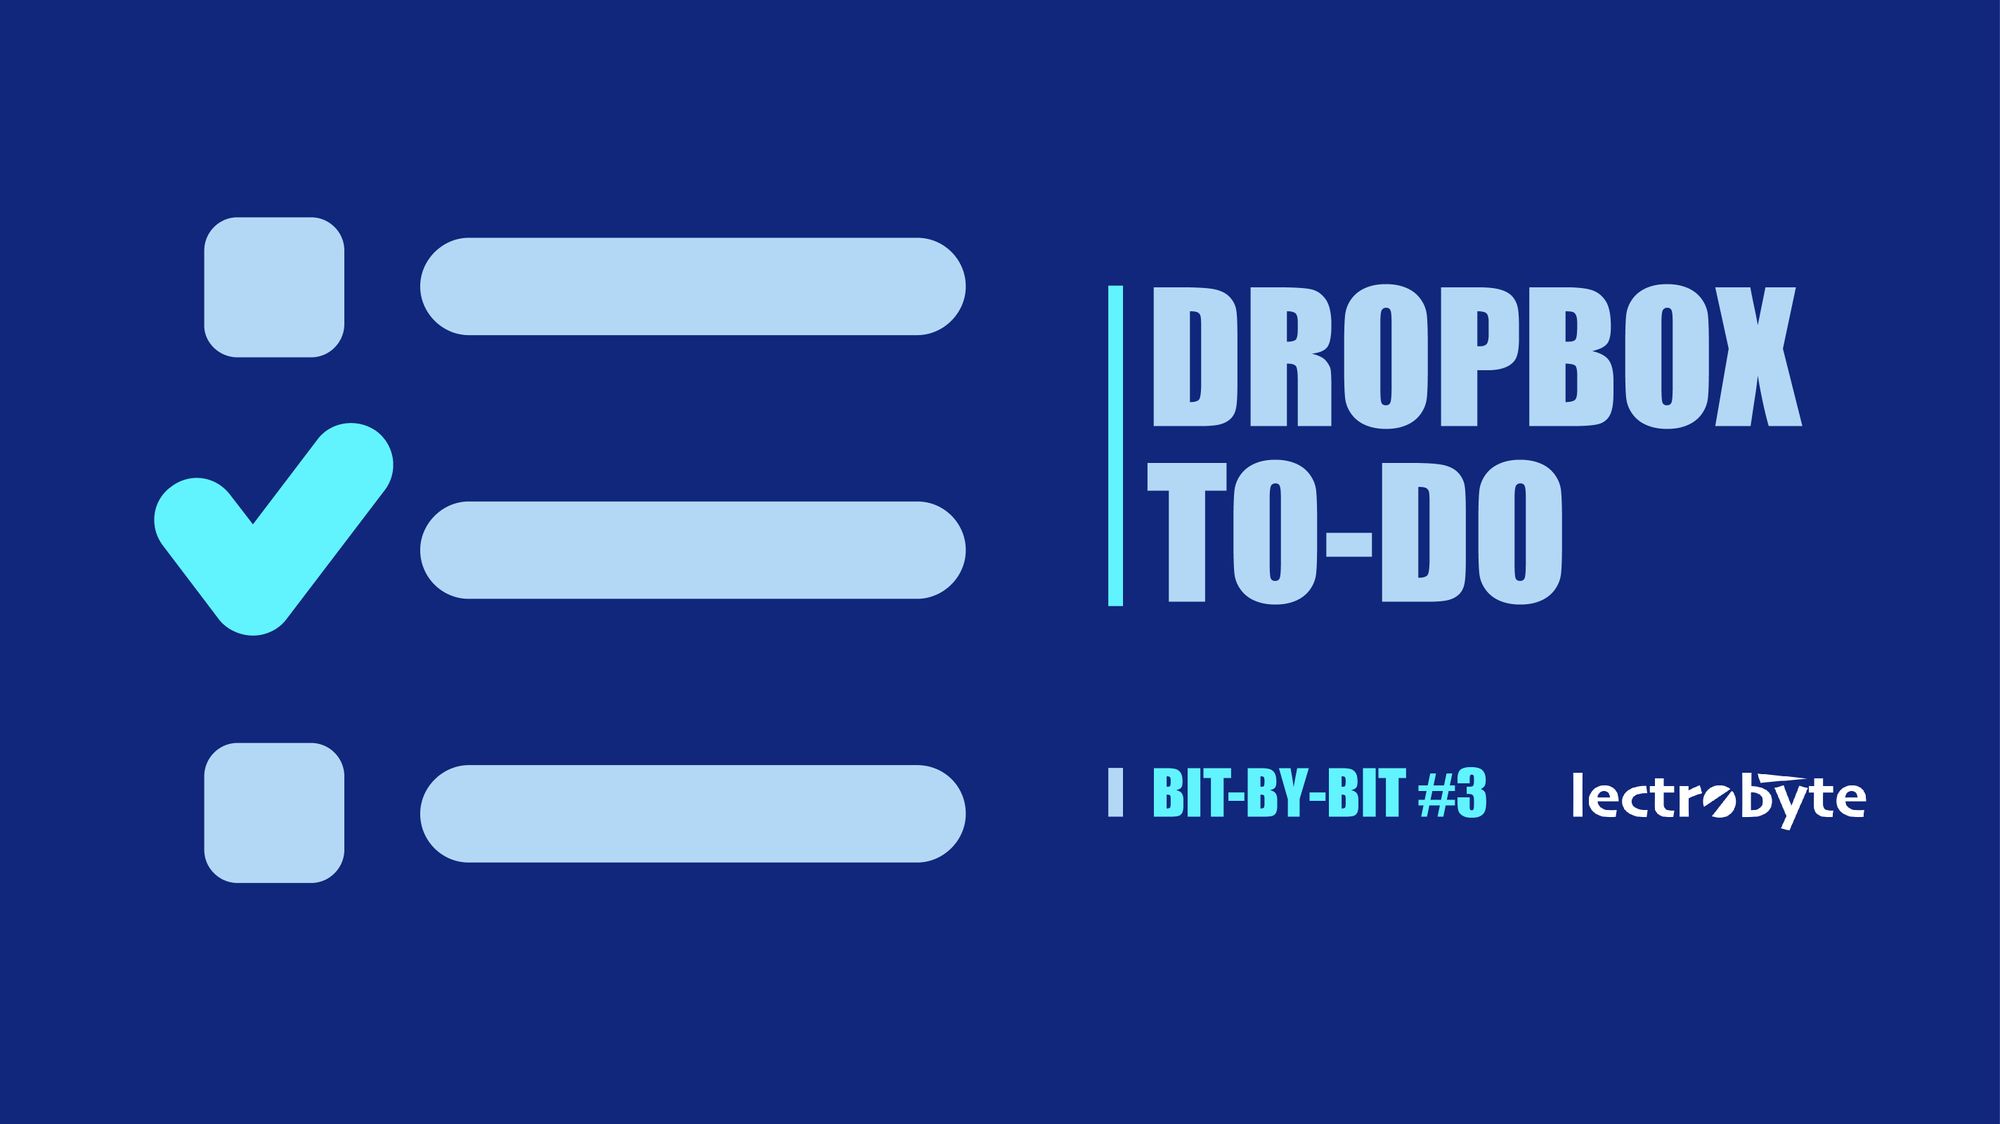 Bit-By-Bit #3 Dropbox To-do artwork. Icon by Adrien Coquet @ The Noun Project.